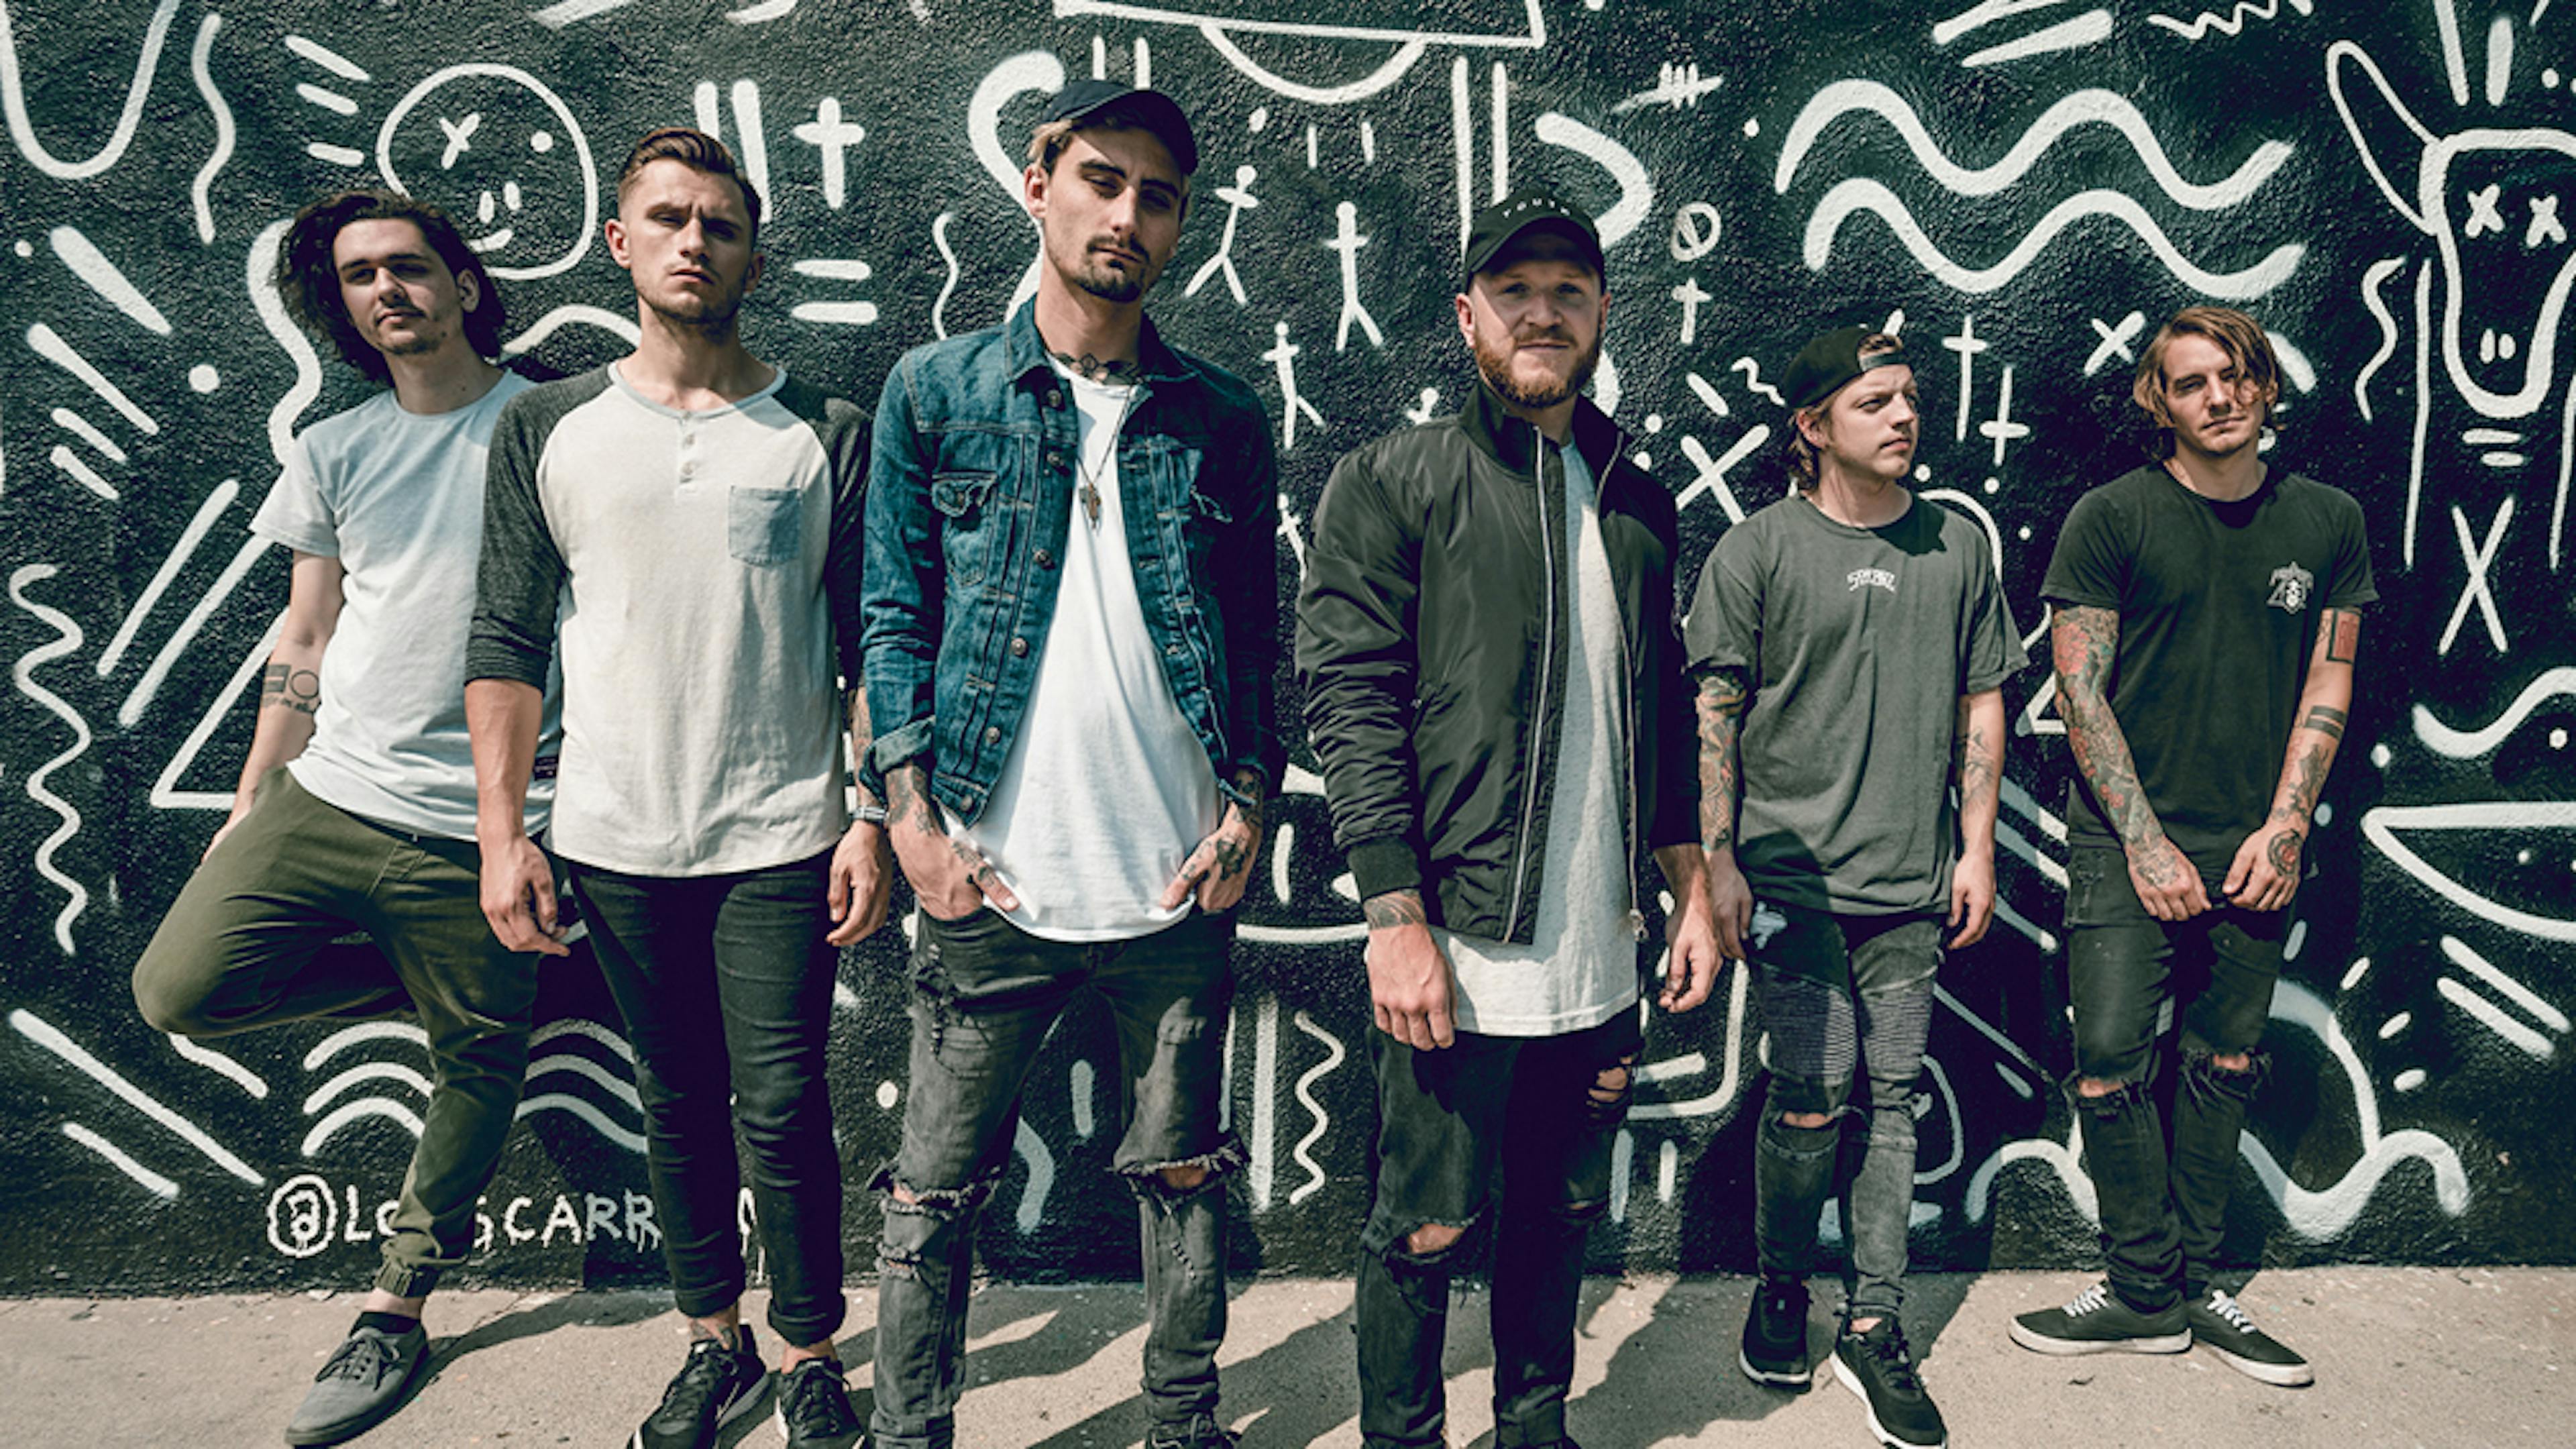 We Came As Romans To Put On Memorial Show For Singer Kyle Pavone